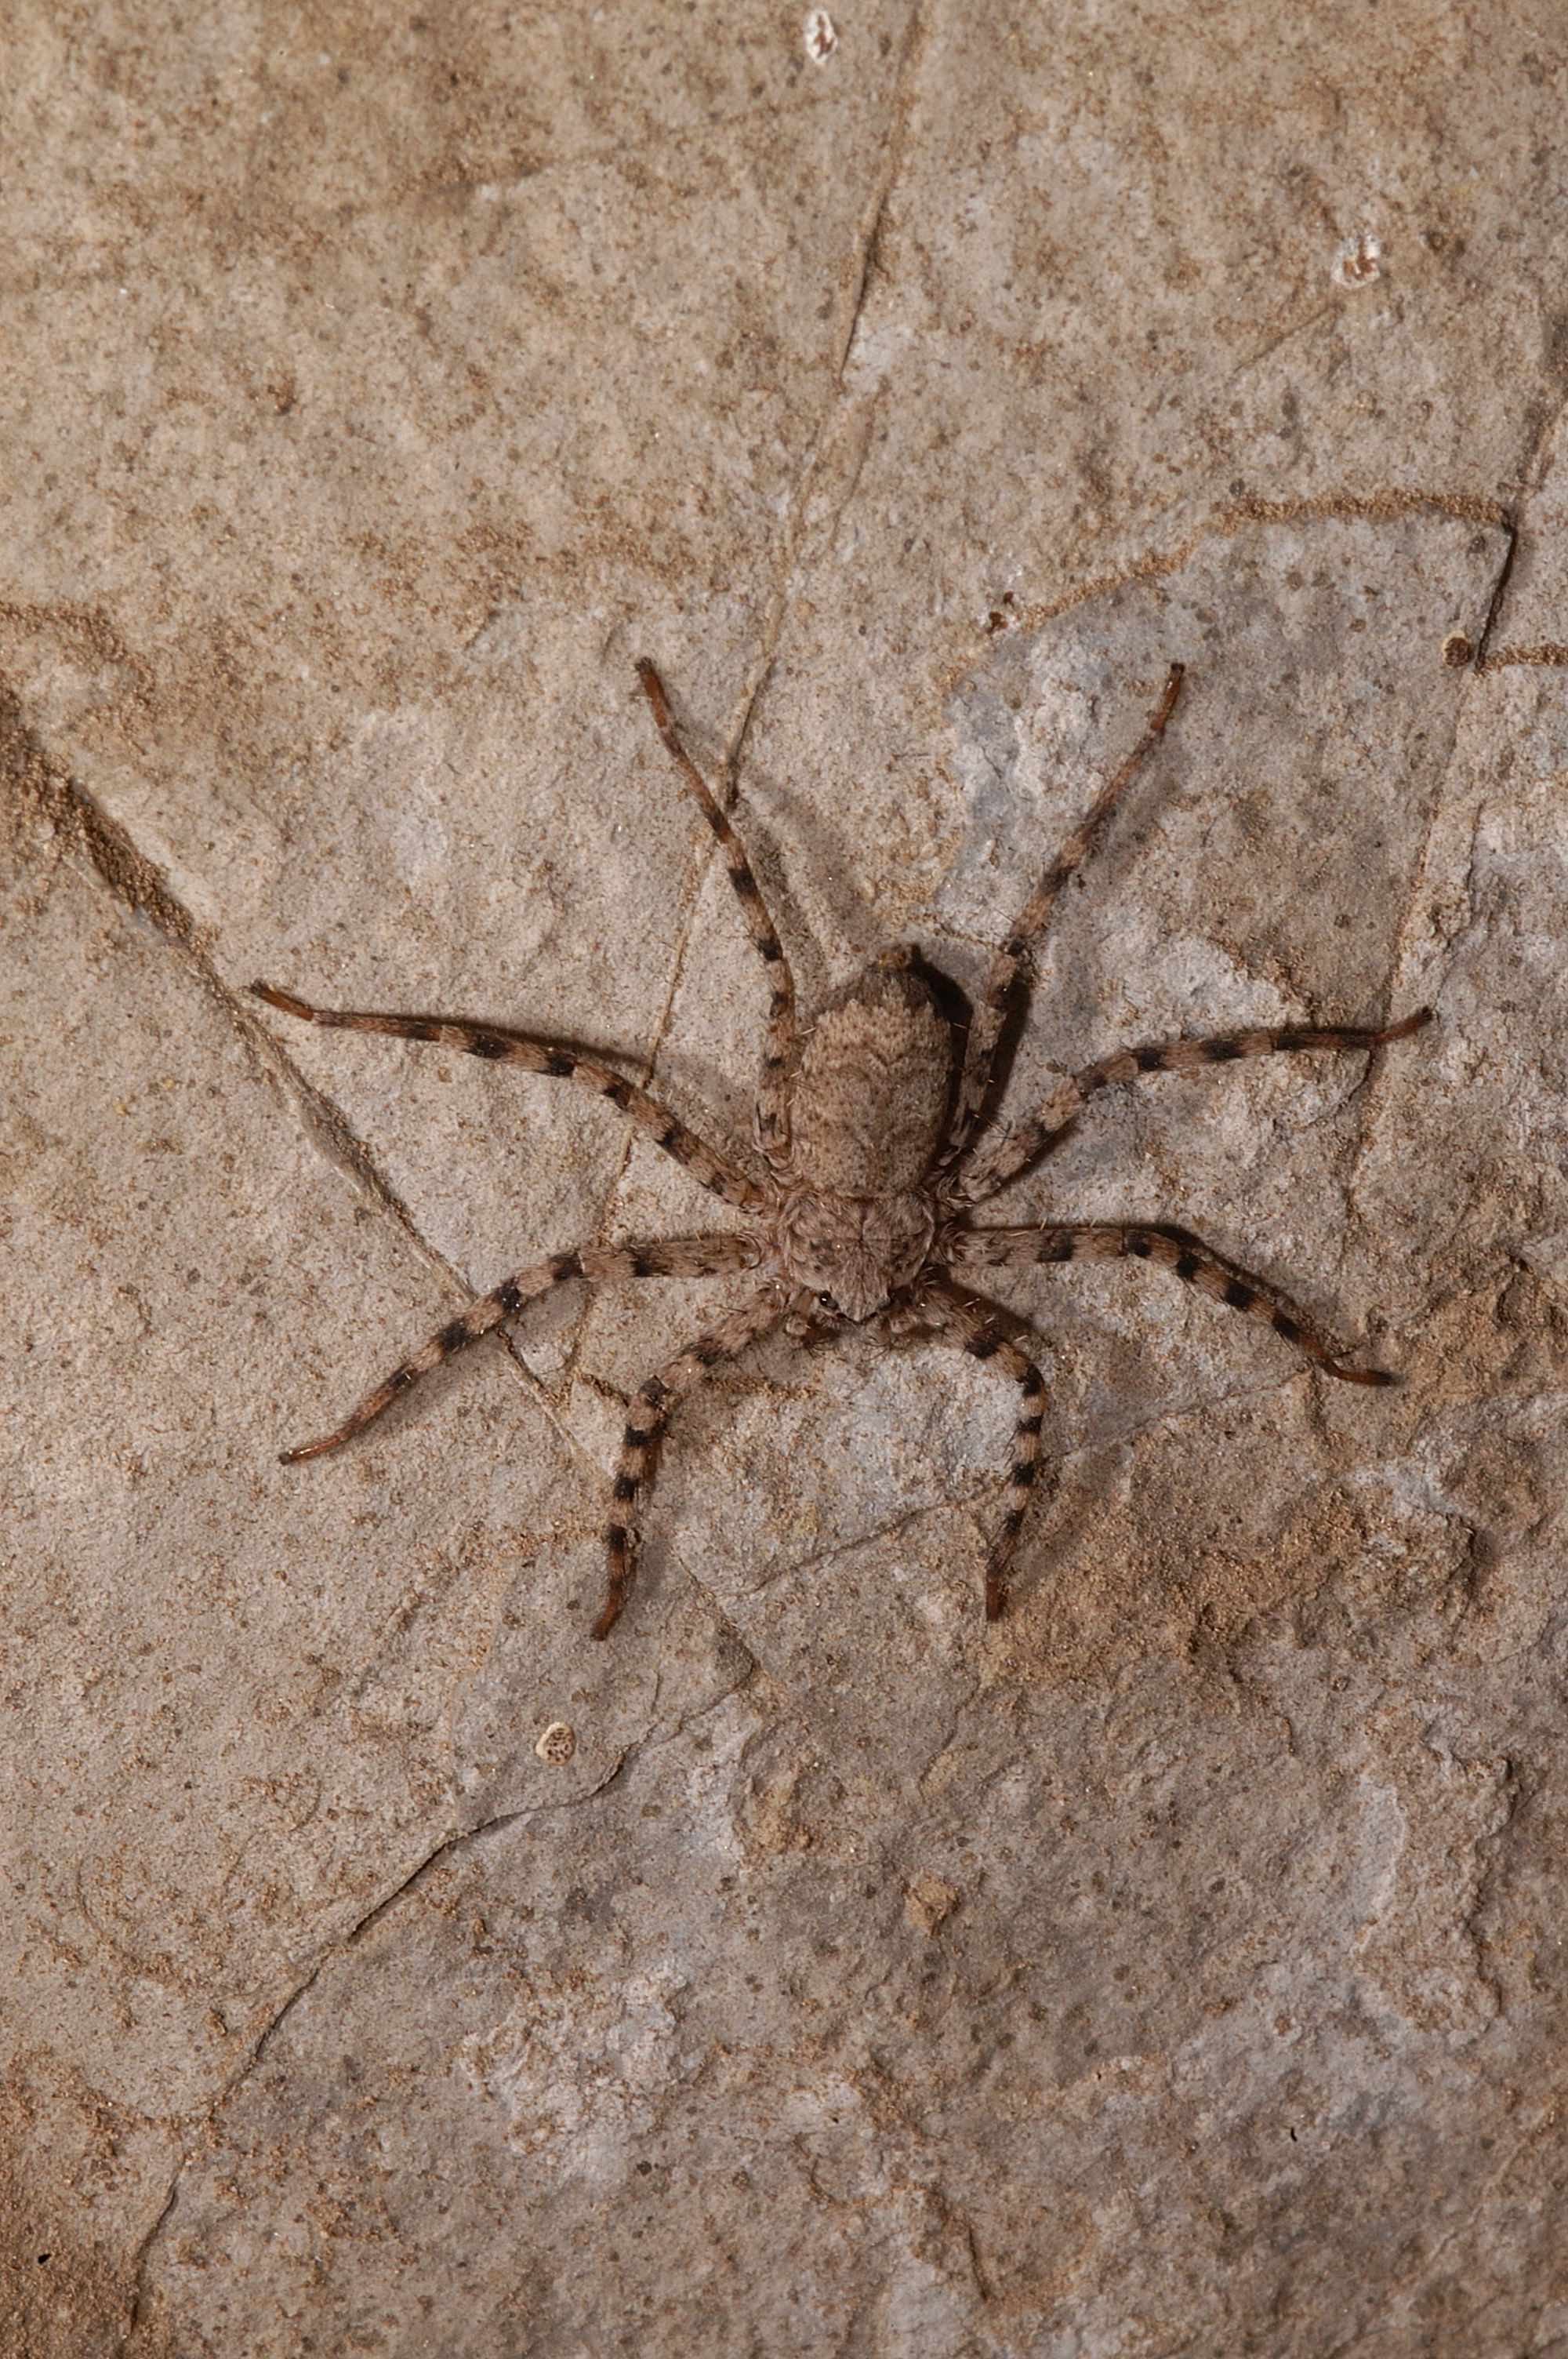 Spider in a Mexican Cave photo by Jean Krejca